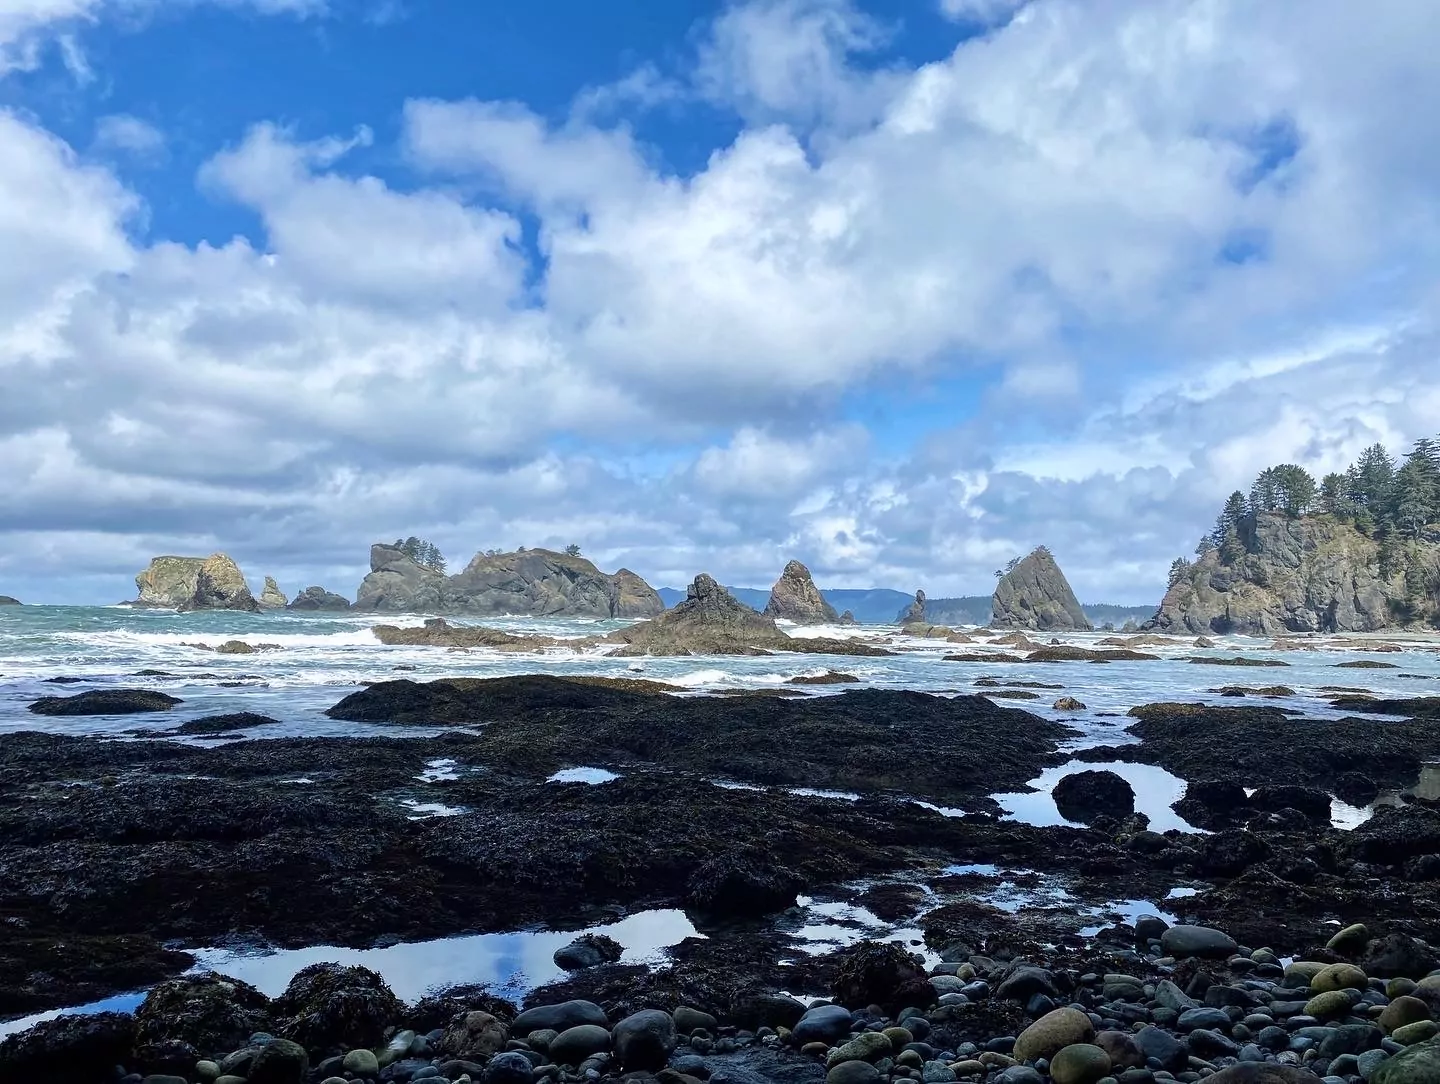 guided backpacking trip to North Route Wild Olympic Coast, trekking and backpacking, best backpacking trips in National parks 